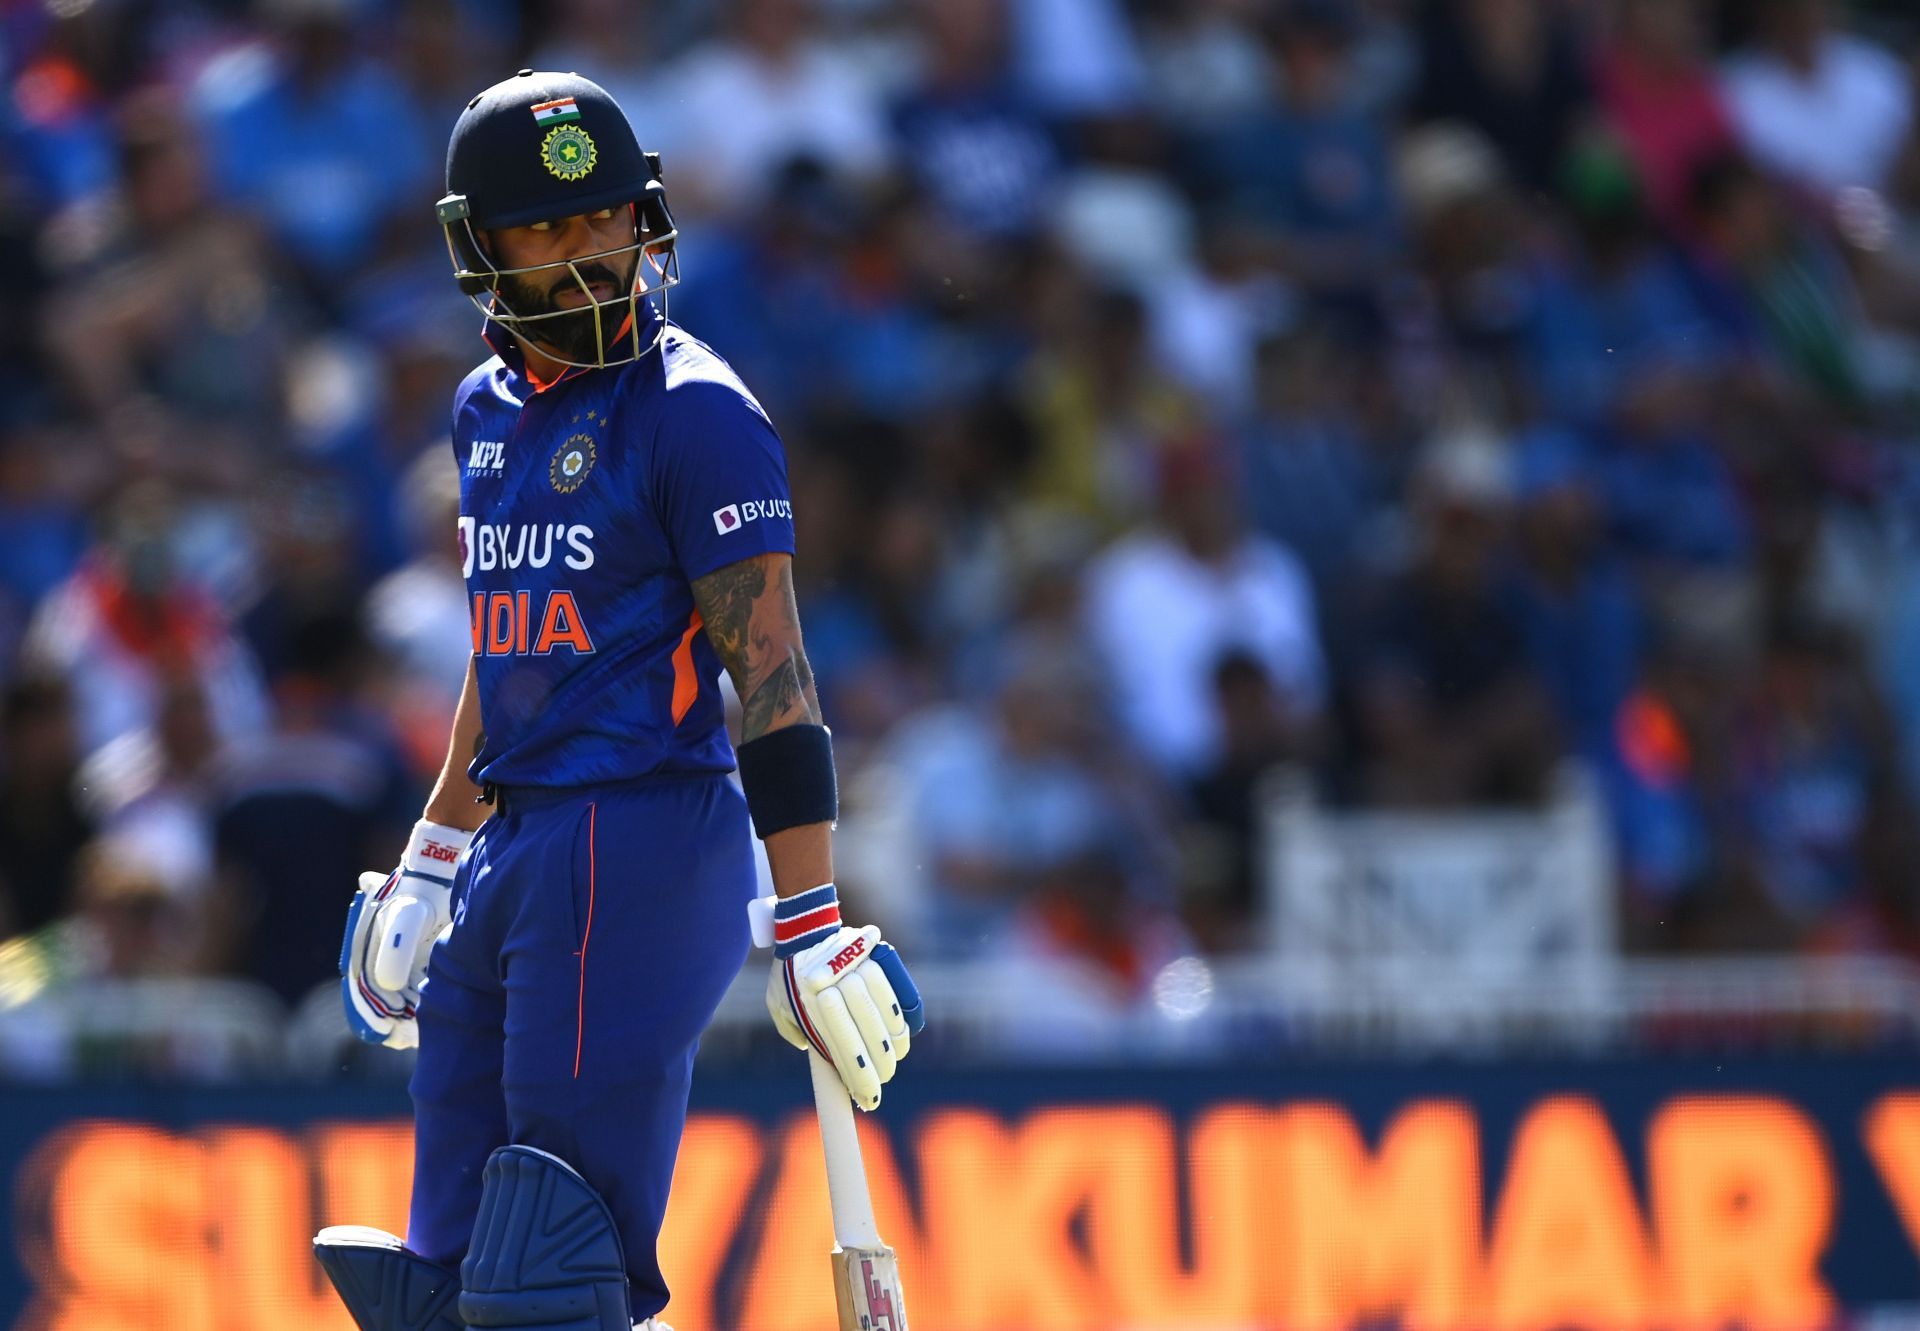 Will Virat Kohli be dropped or will he be backed?